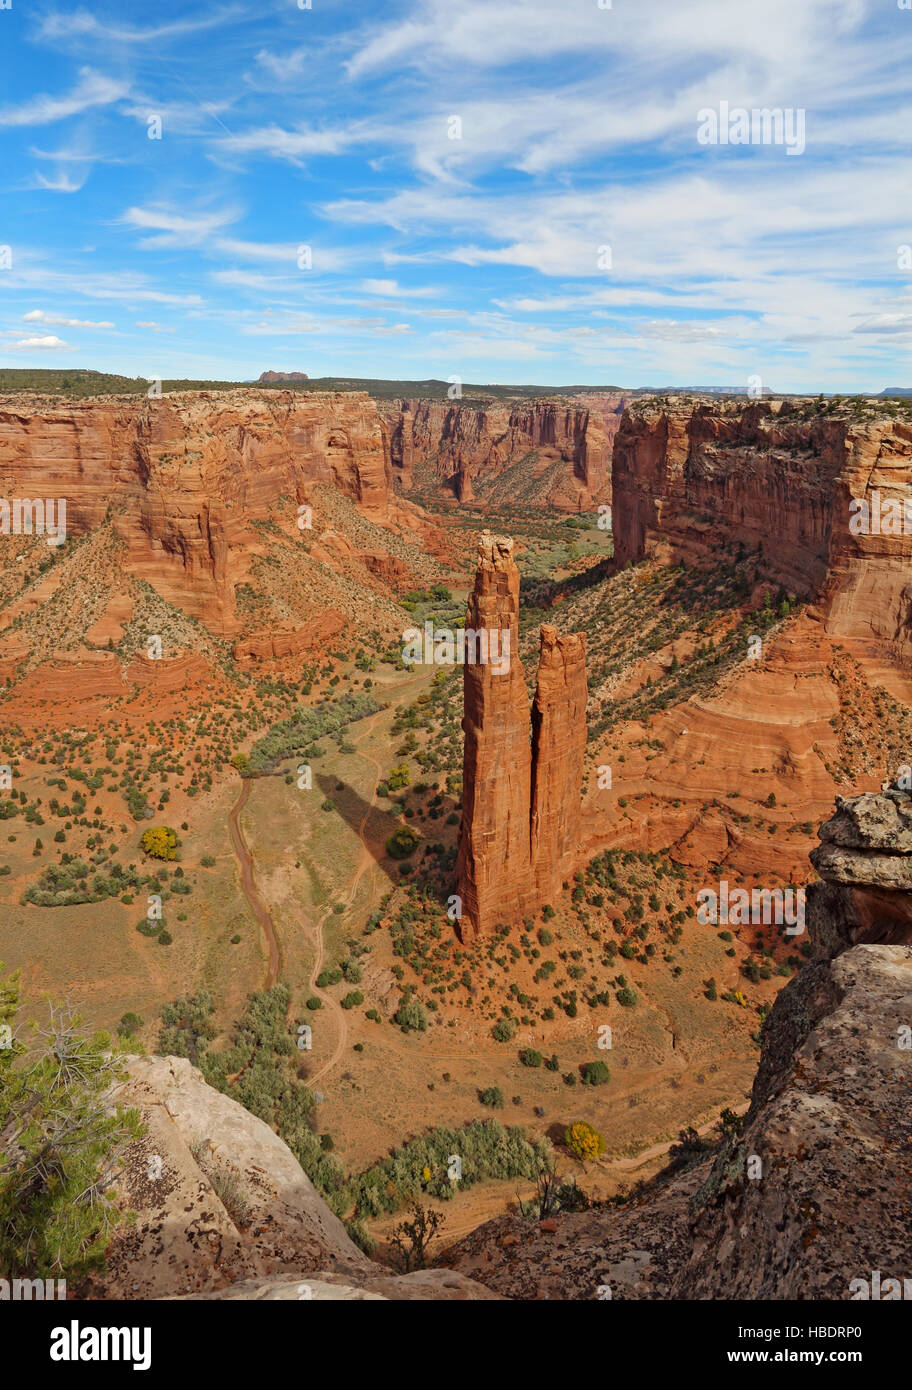 The red sandstone spire of Spider Rock at Canyon de Chelly National Monument in the Navajo Nation near Chinle, Arizona vertical Stock Photo